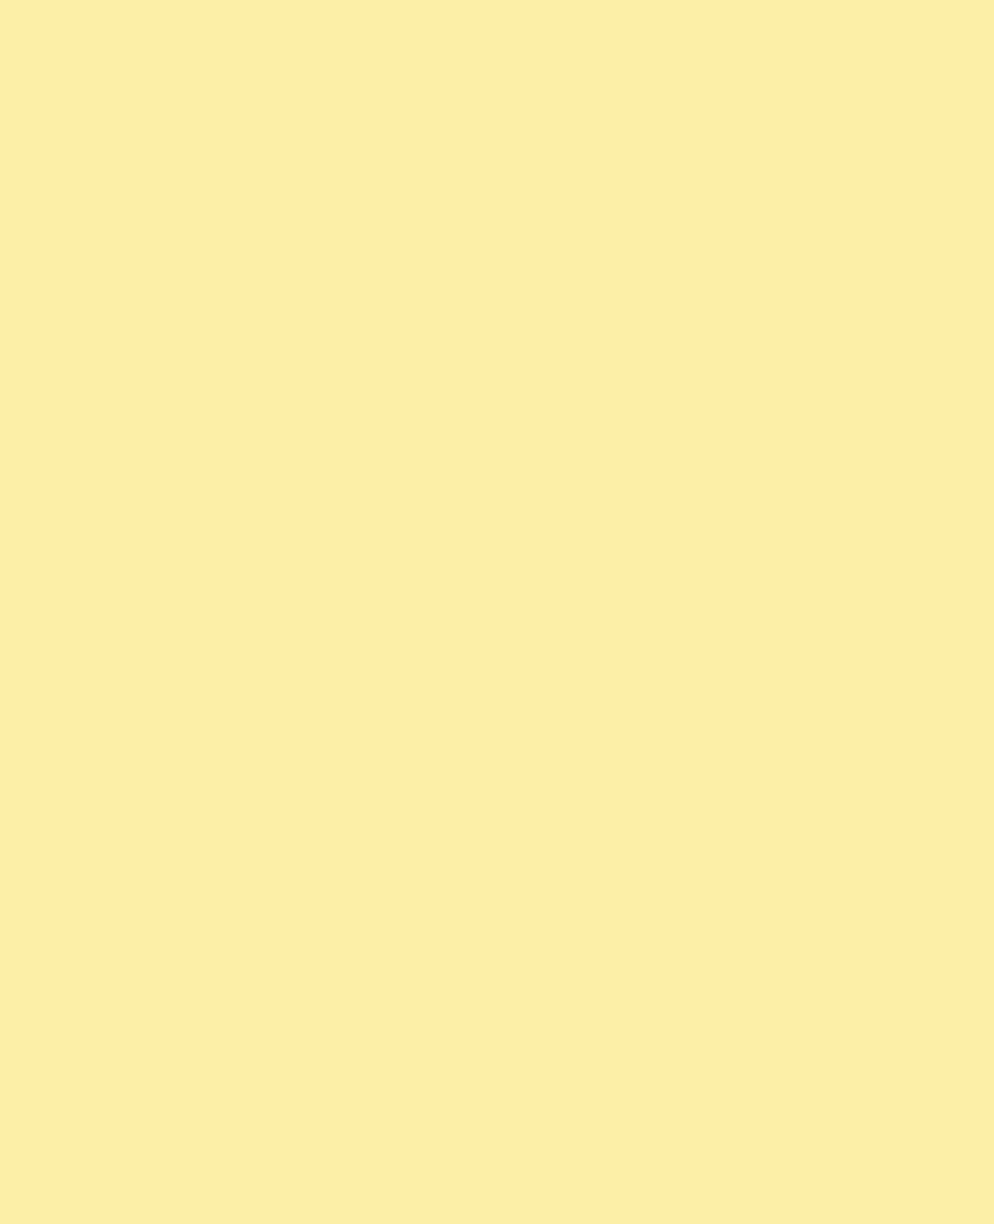 12209941224319-yellowbackground.png